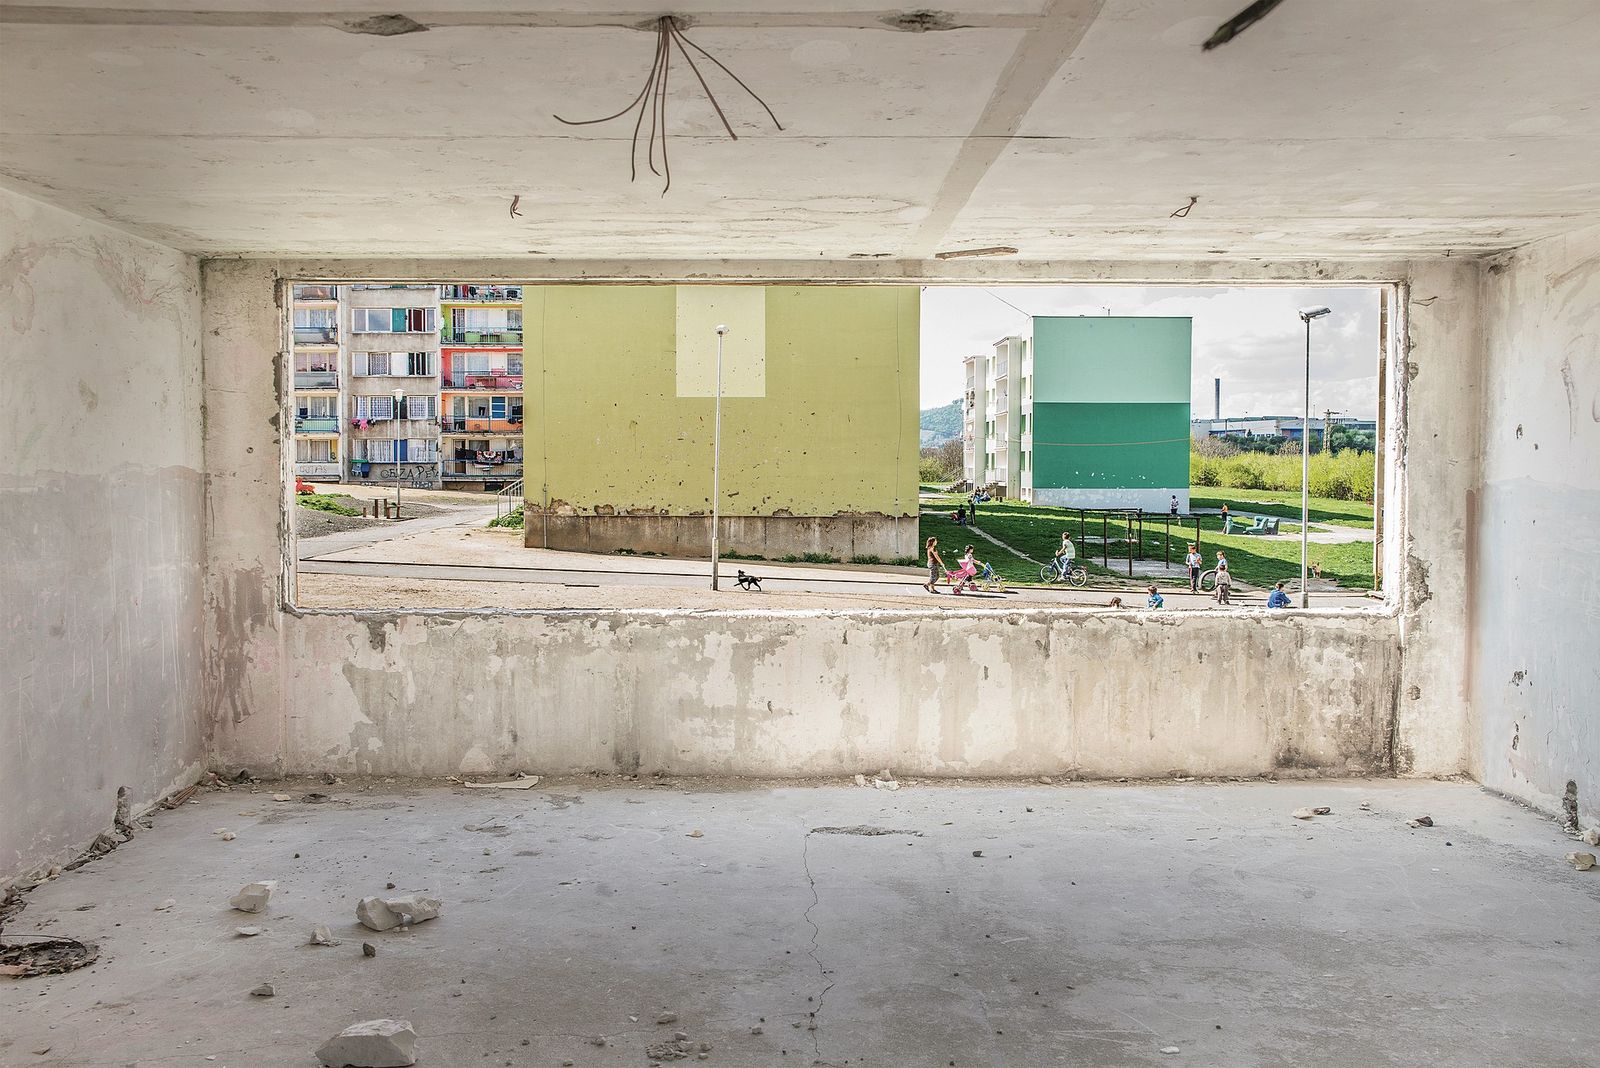 © Jana Plavec - A street view from an abandoned block of flats, nowadays torned down by bulldozers.